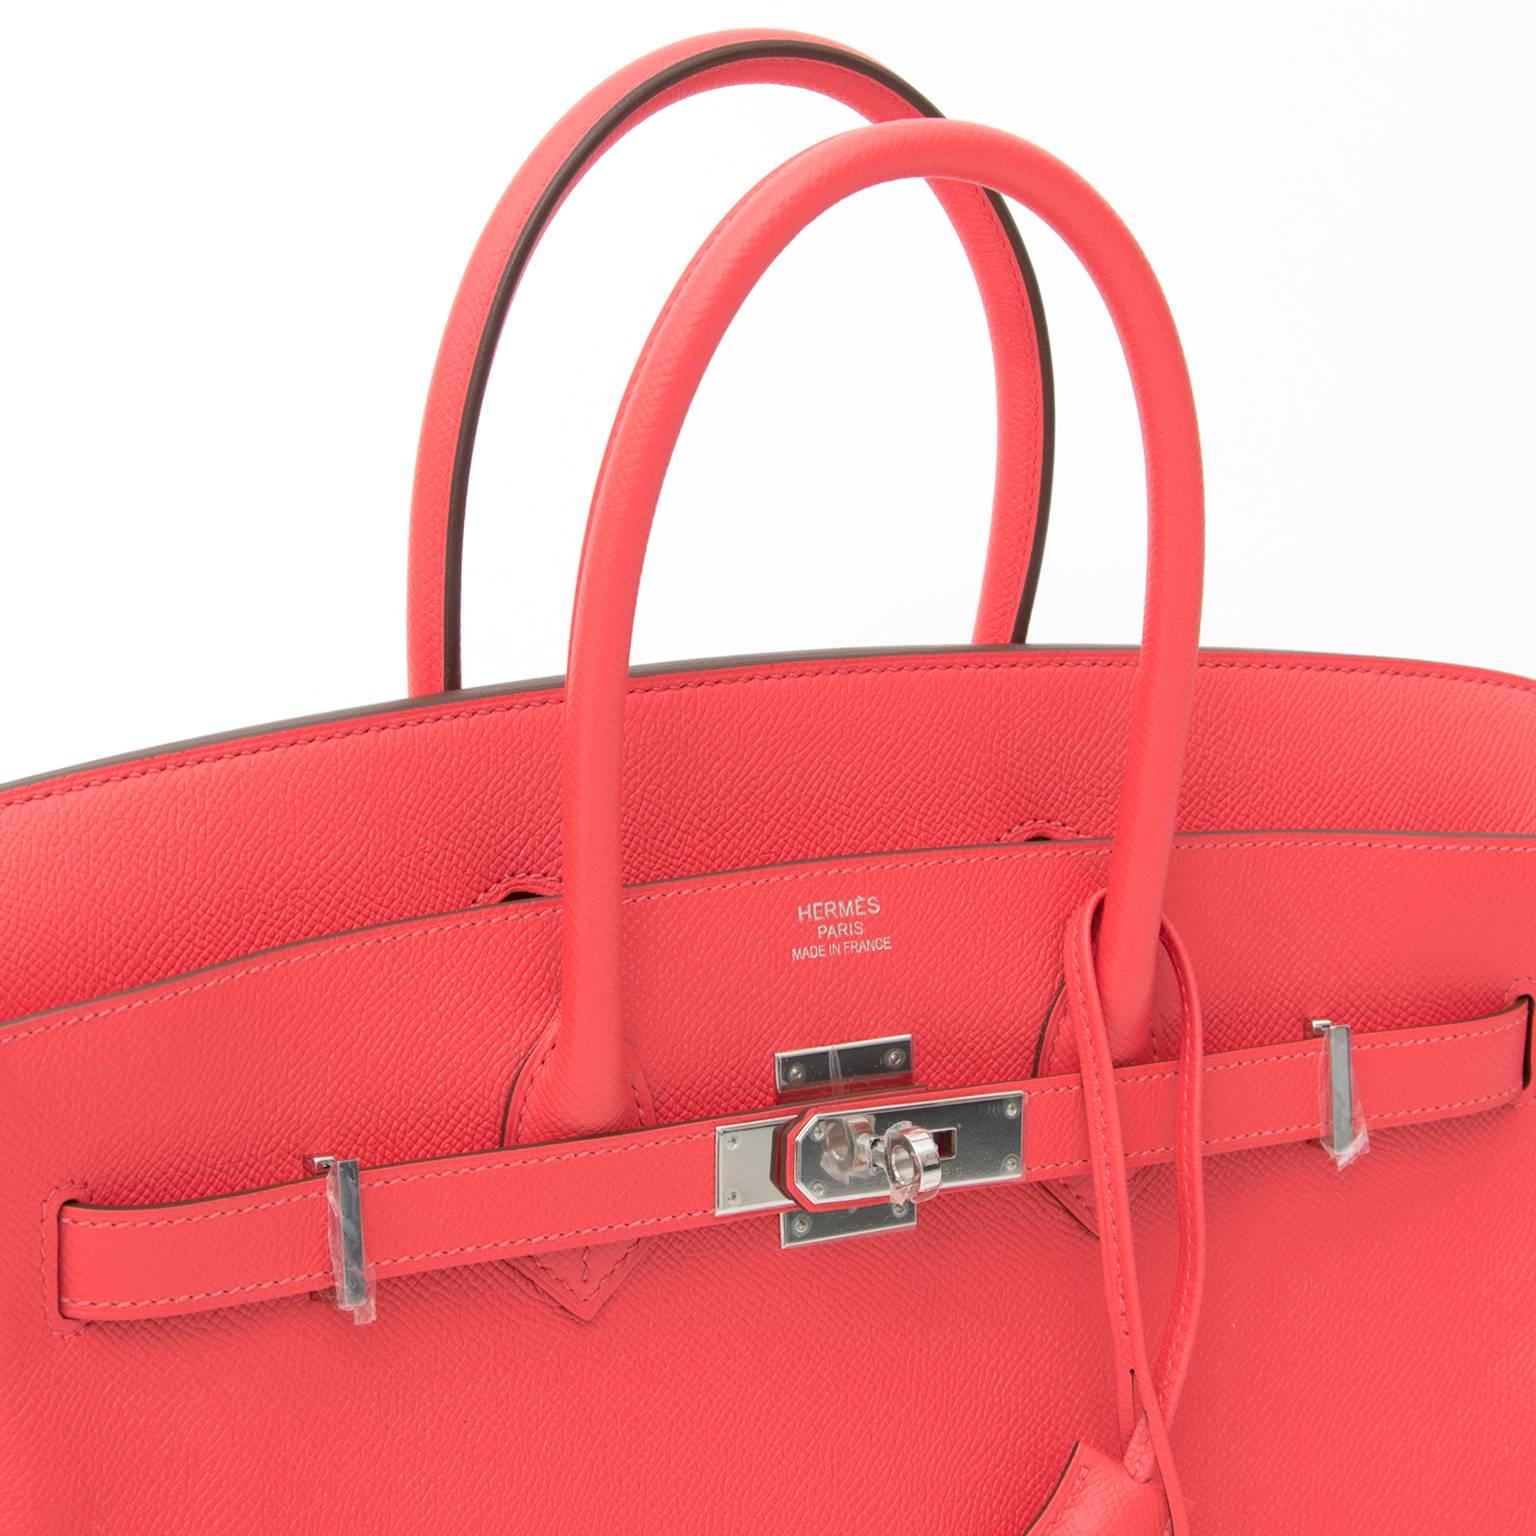 This is a brand new, storebought Hermès bag, handcrafted from Epsom leather, a grained leather type that keeps its upright structure. 
The color is a lively, enchanting pink, Rose Jaipur, named after the famed Inidian city.
The paladium silver-tone